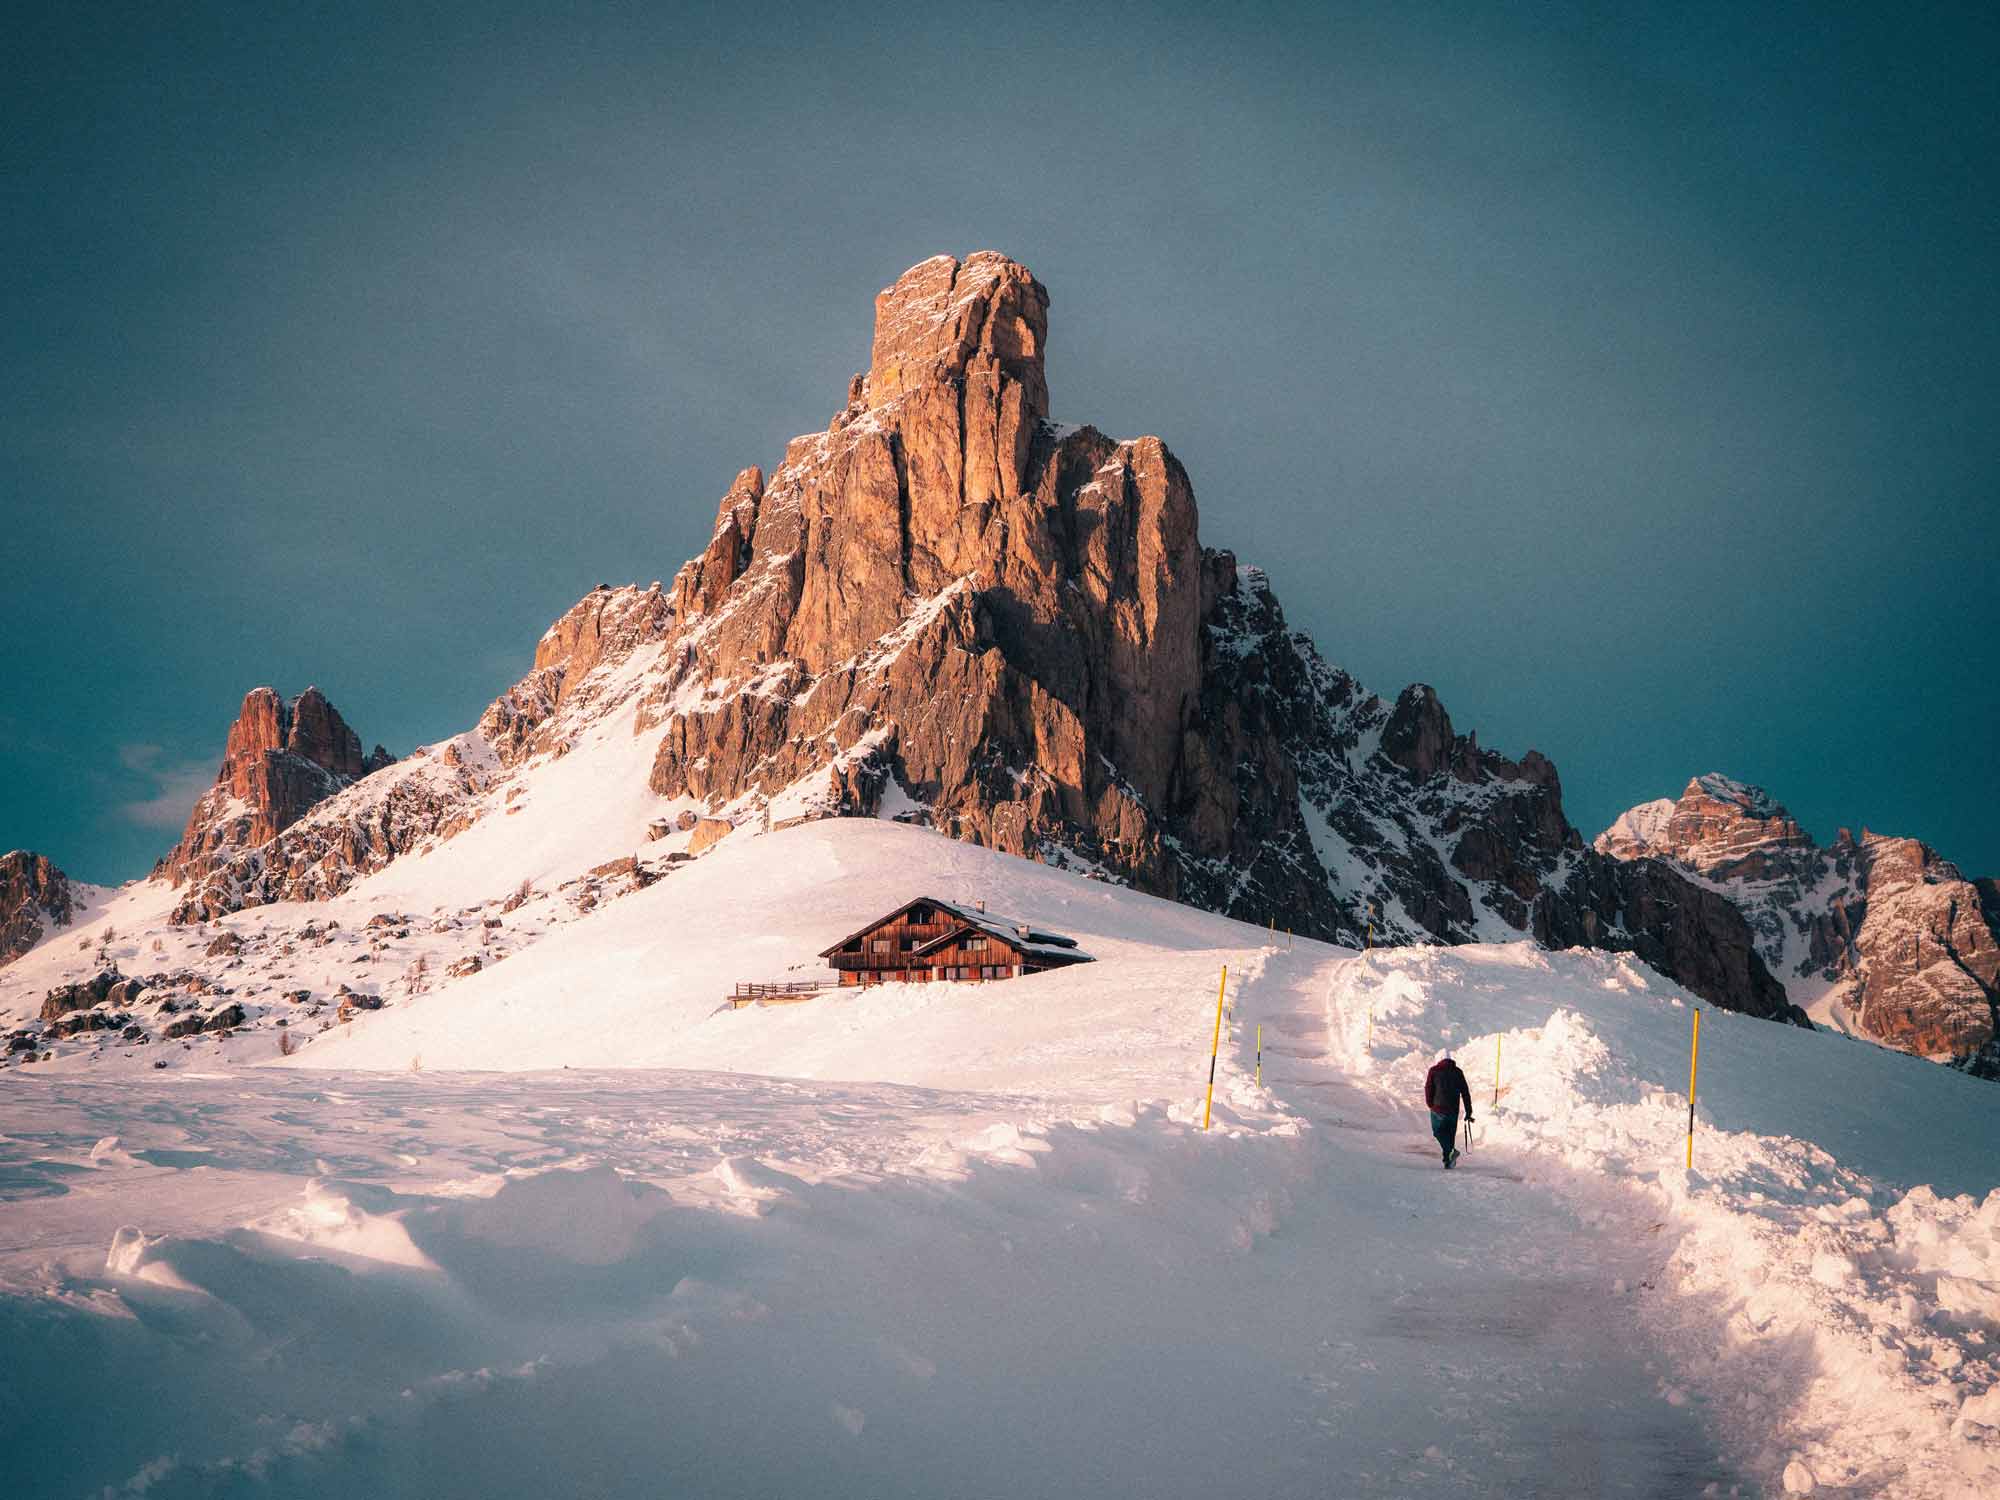 Individual hiking along a snowy mountain trail in Cortina d'Ampezzo